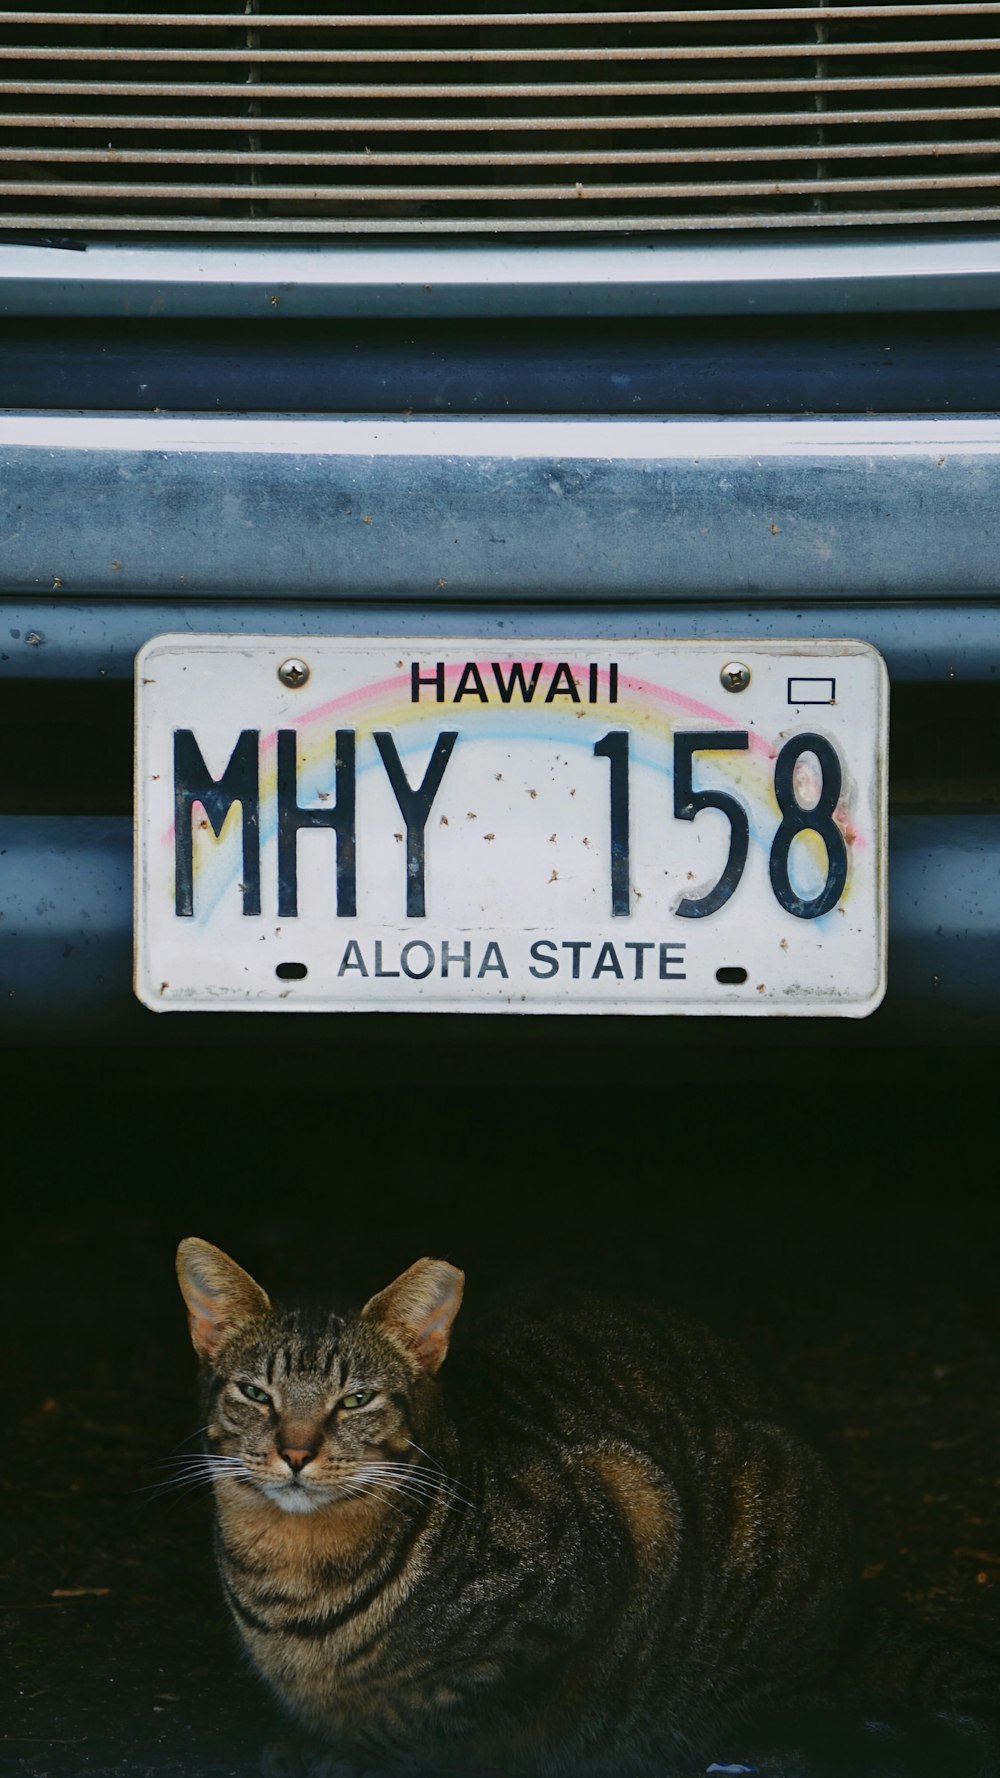 a cat laying underneath a license plate on a car